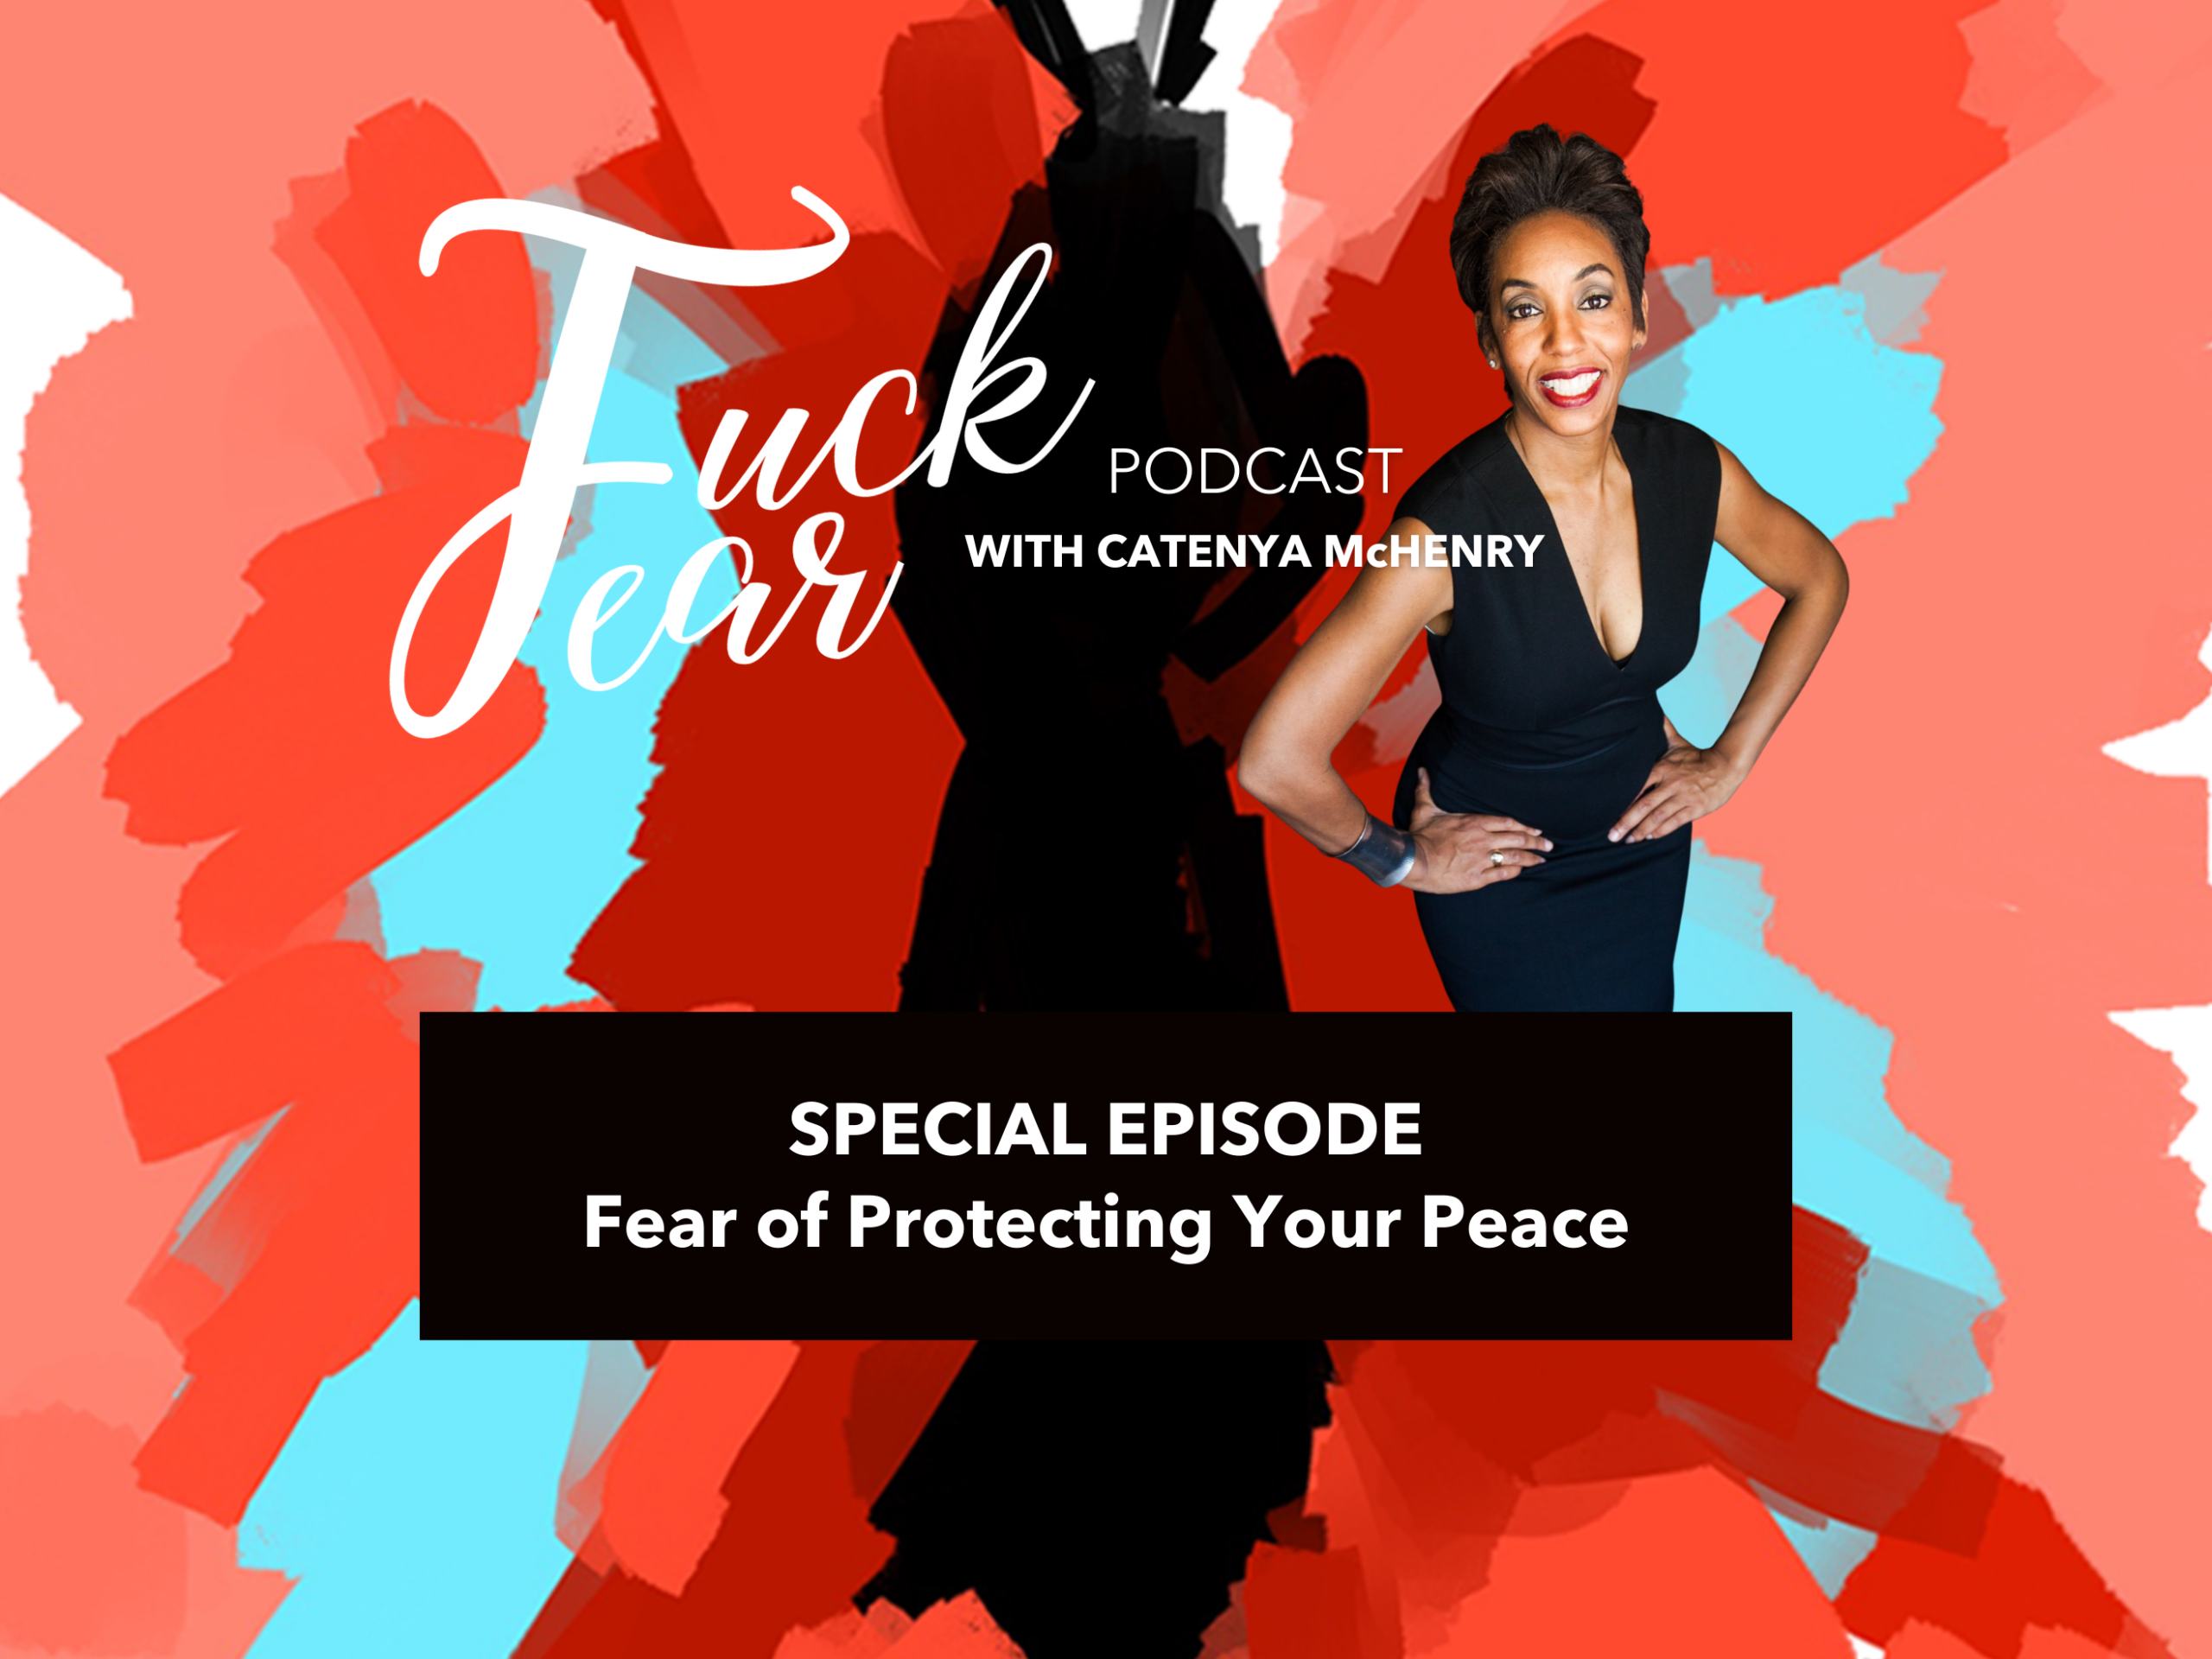 Fear of Protecting your peace Fuck Fear podcast episode with Catenya McHenry